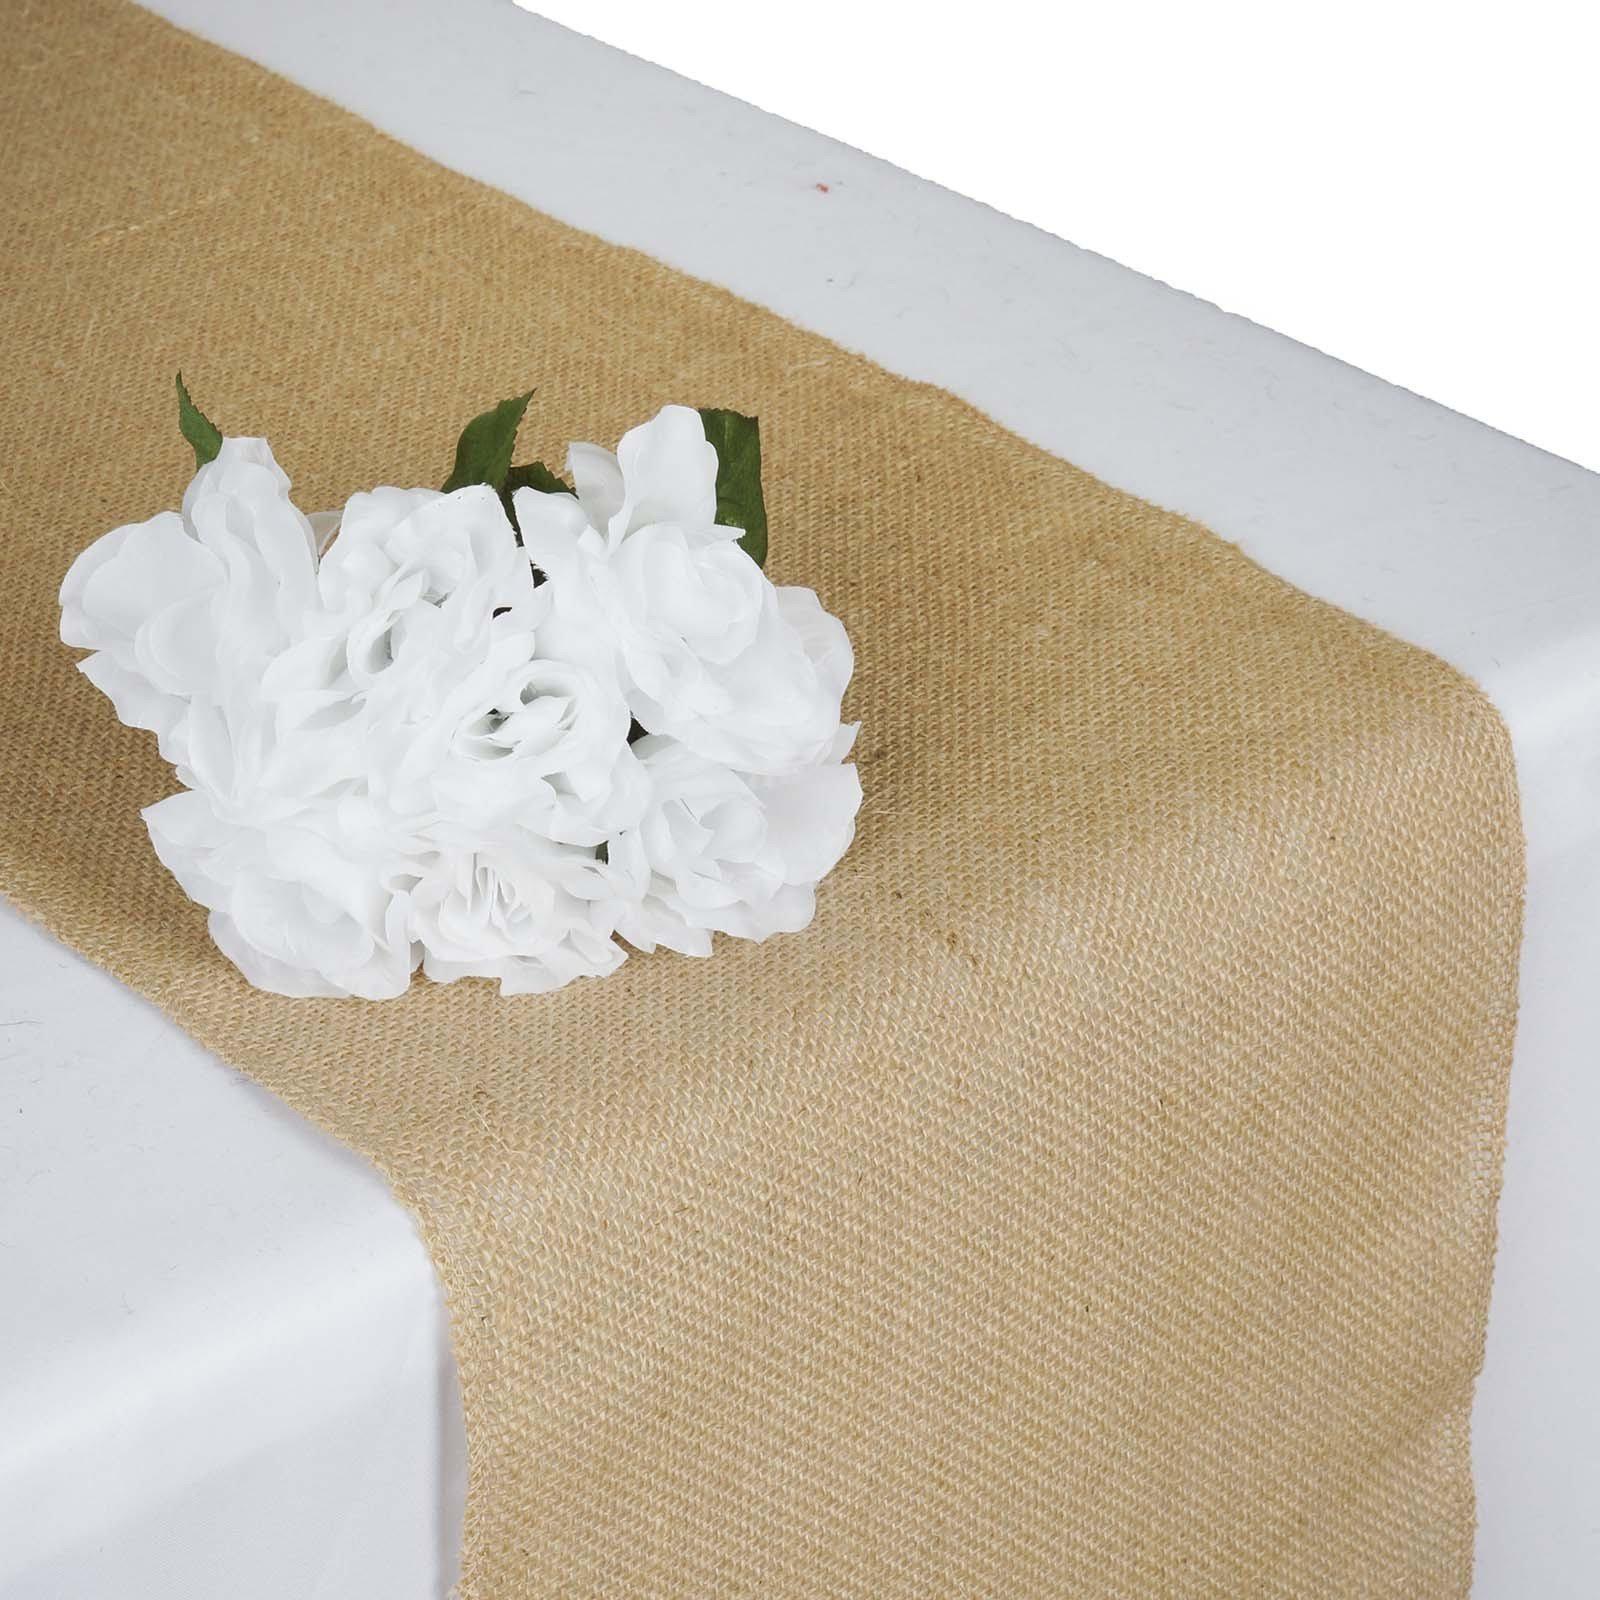 Burlap Natural Jute Table Runners, Rustic Table Décor, Boho Chic, Various 12-Inch Wide Sizes for Weddings, Parties, Birthdays, Anniversaries, and